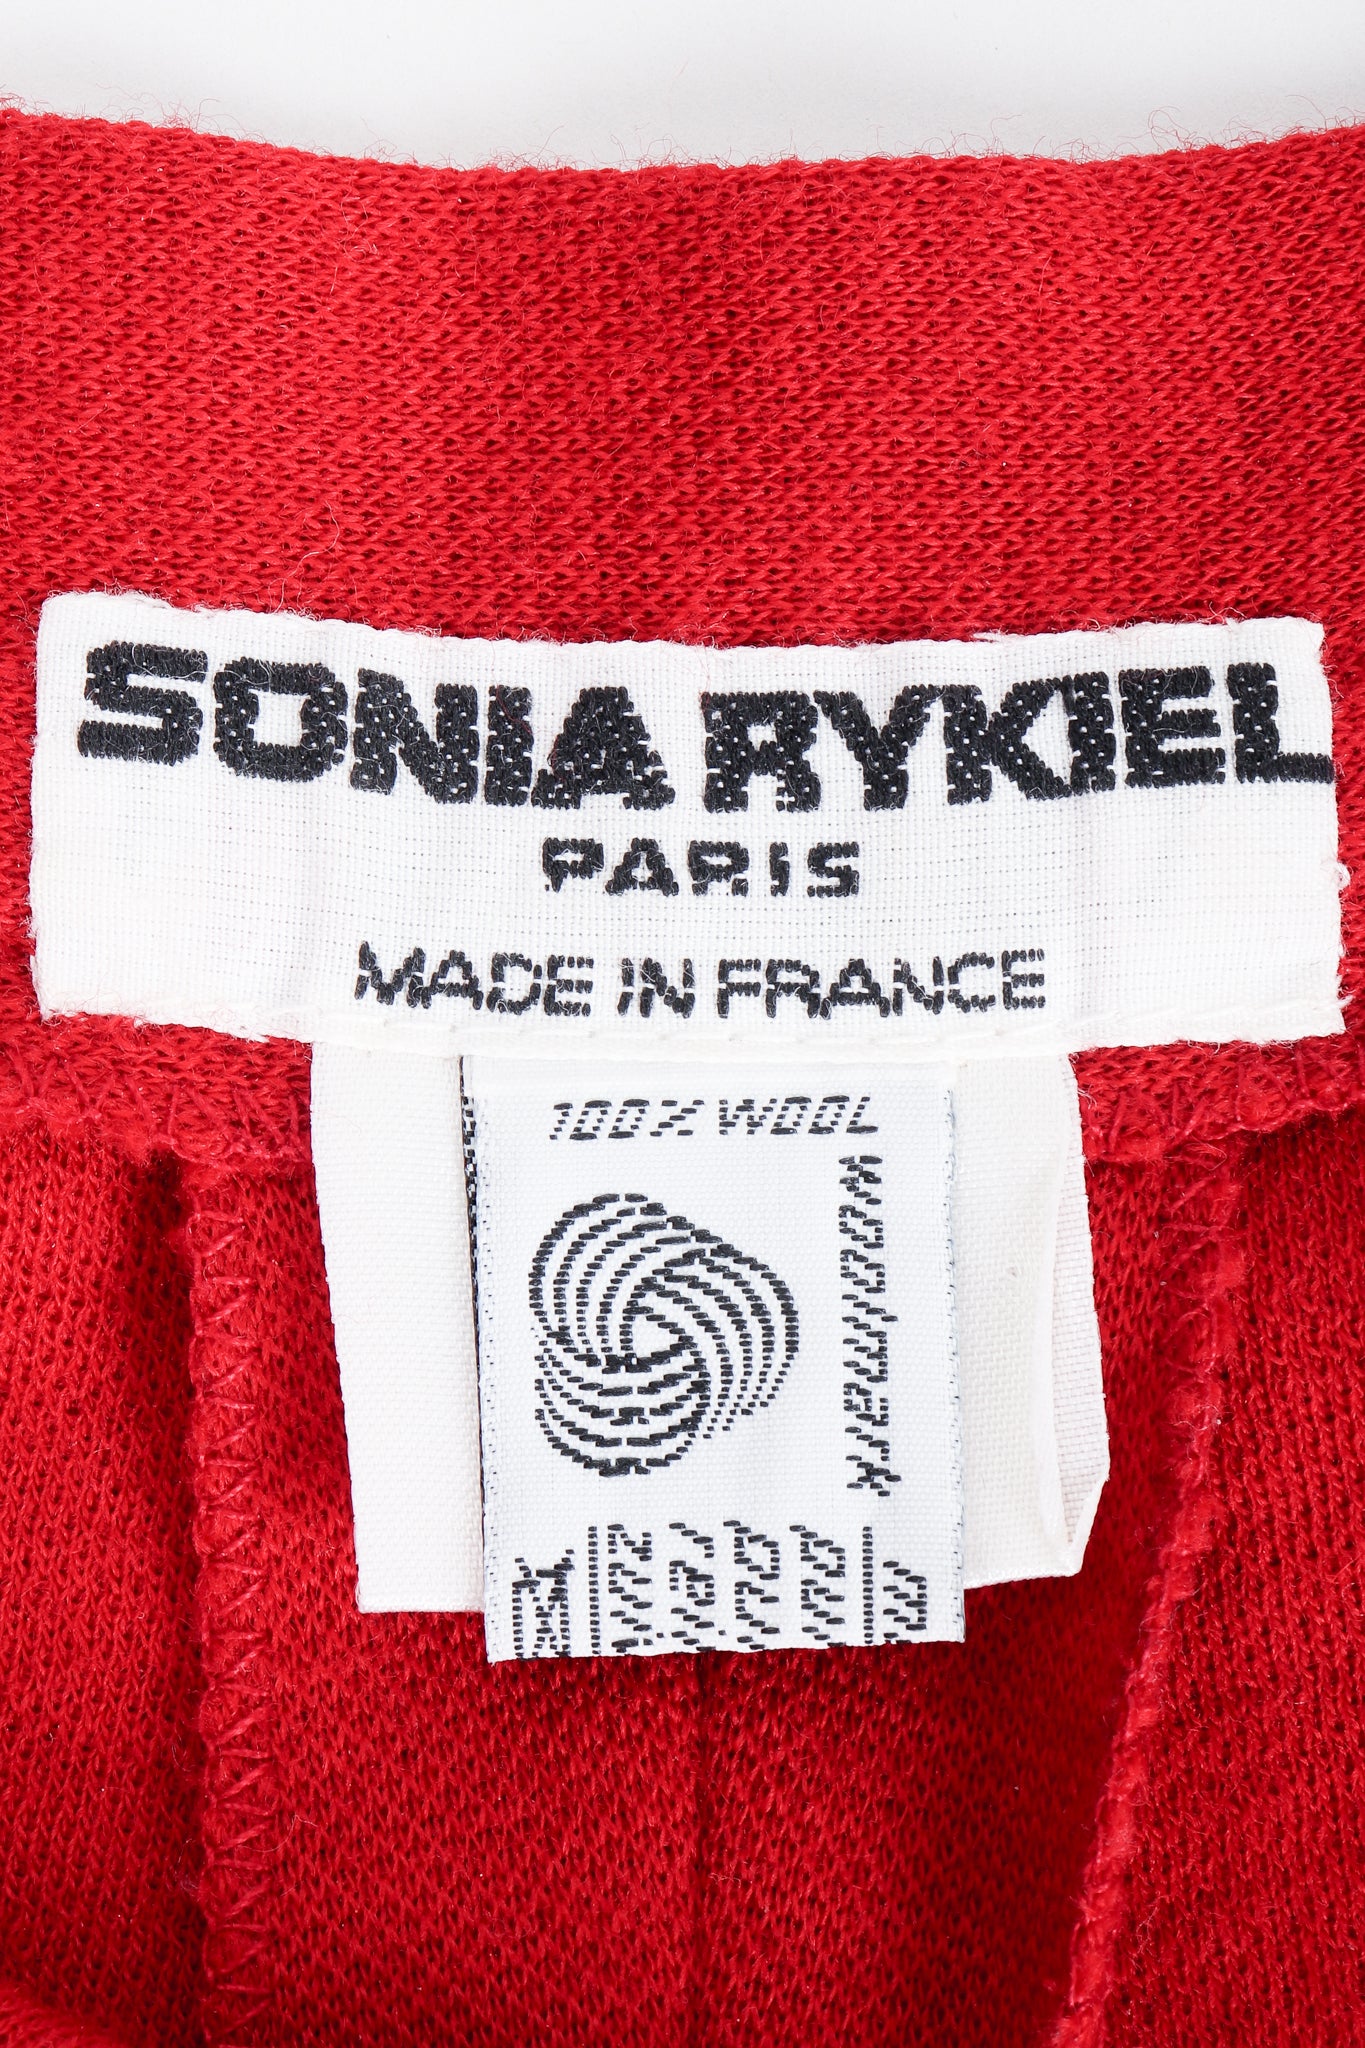 Vintage Sonia Rykiel Red Knit Pant Set label on red